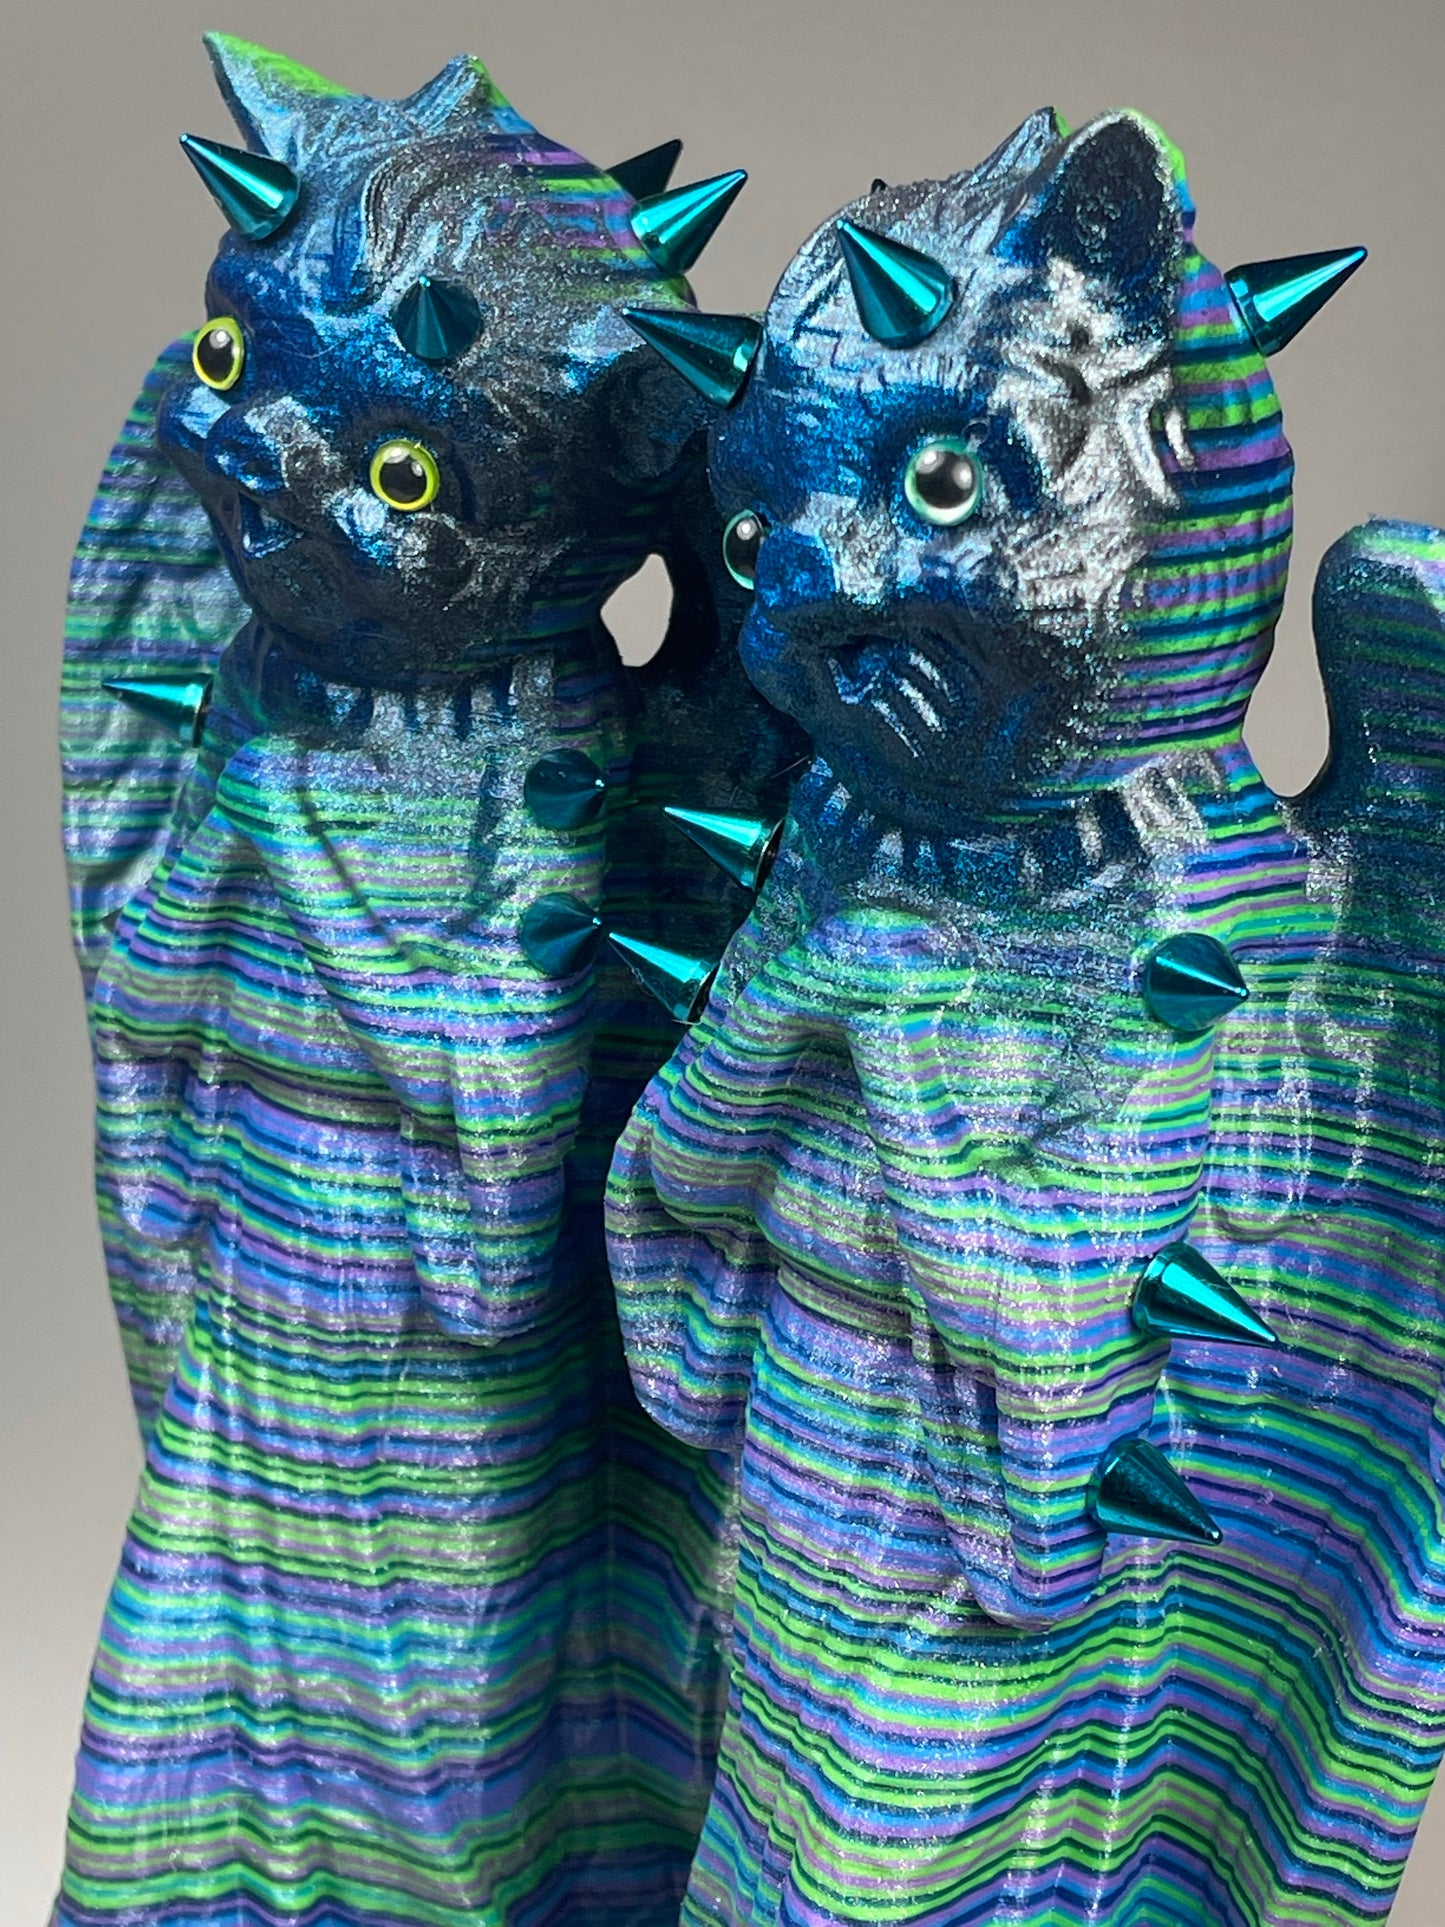 Twin Angel Pigs of the Afterlife: Blue Devil Friends